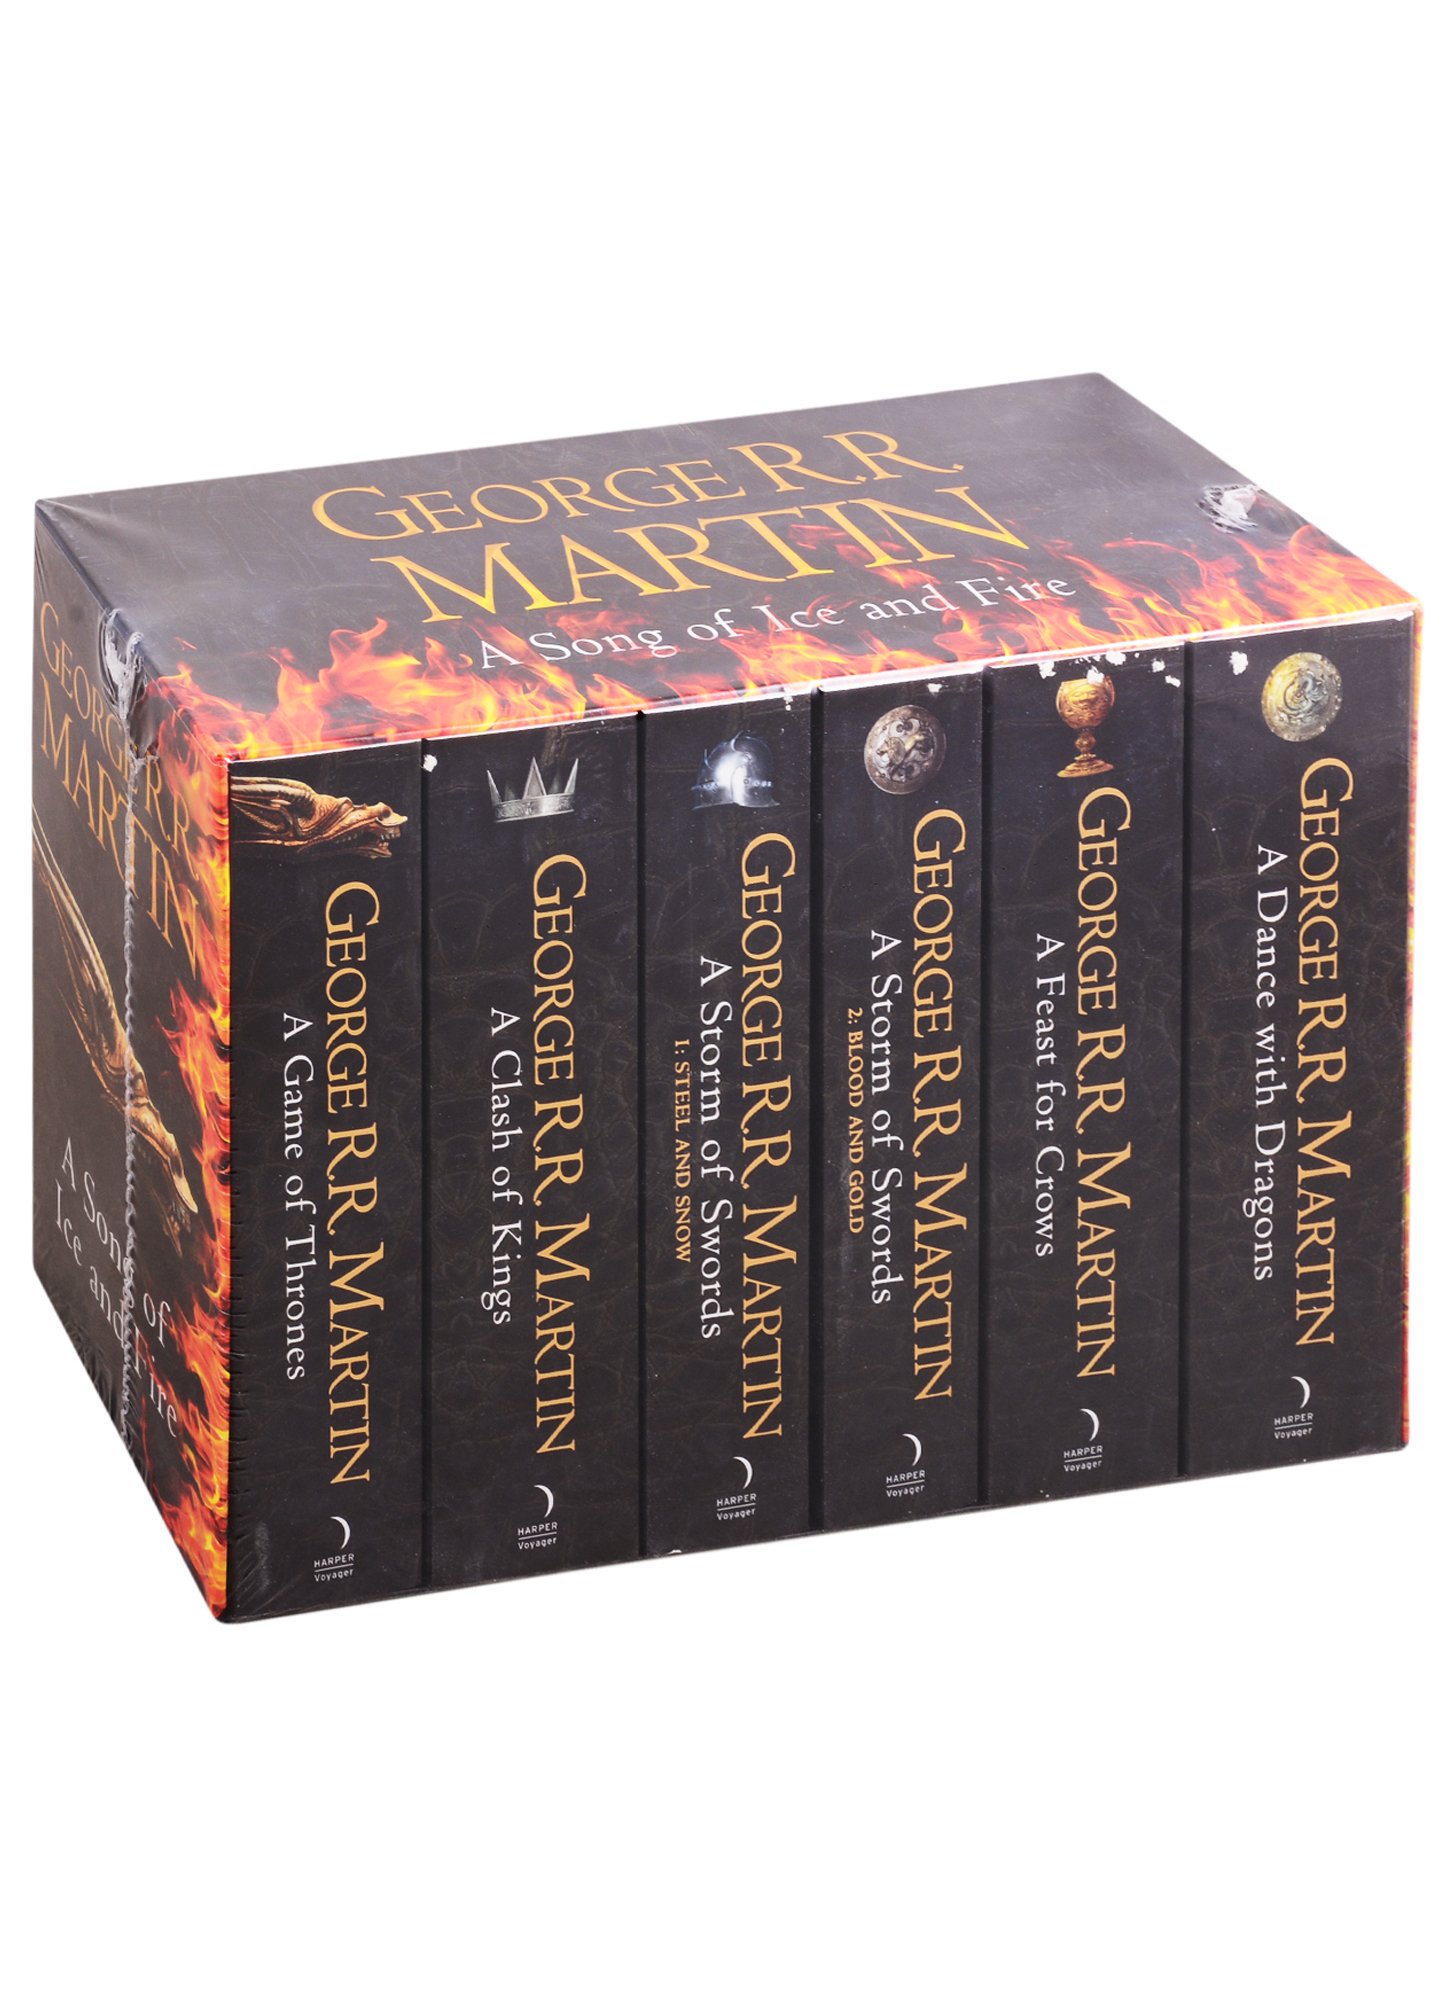 Martin George Raymond Richard Song of Ice and Fire-Game of Thrones: The complete box set of all 6 books Martin George R. R.